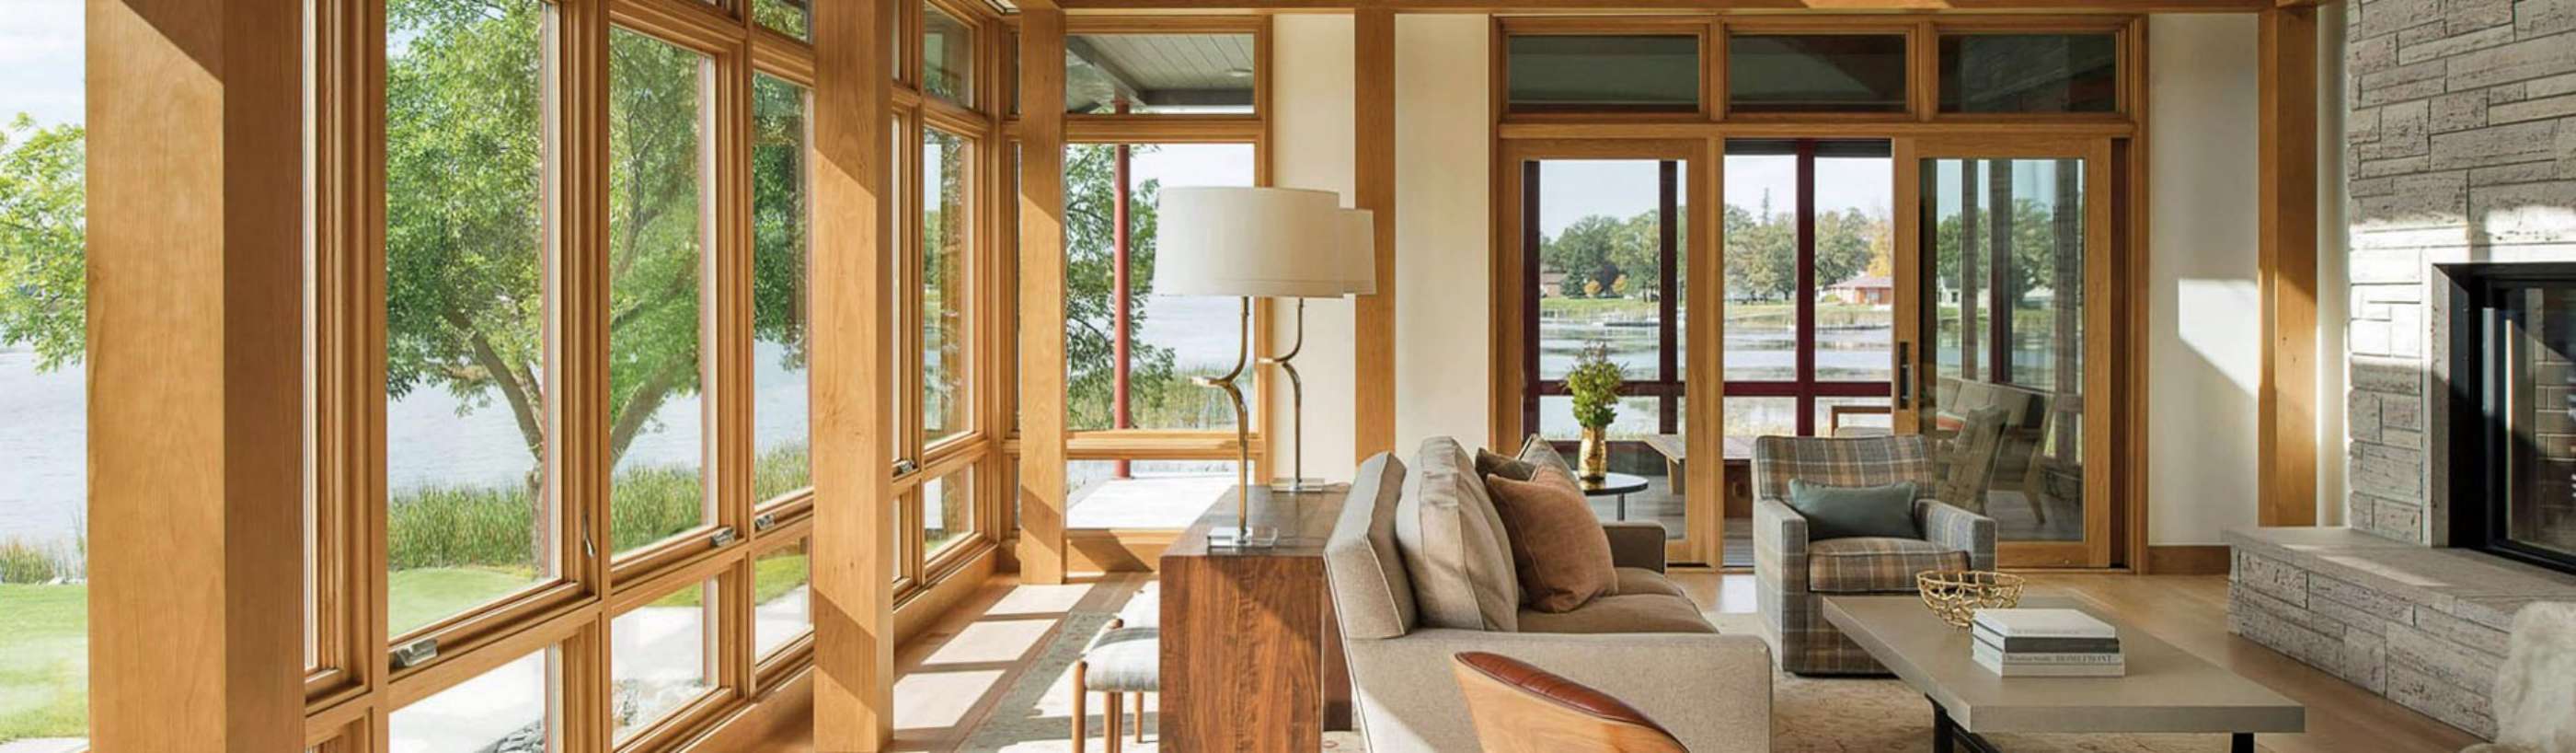 See the Light: CCR Windows Brighten your Home & Improve your Life.